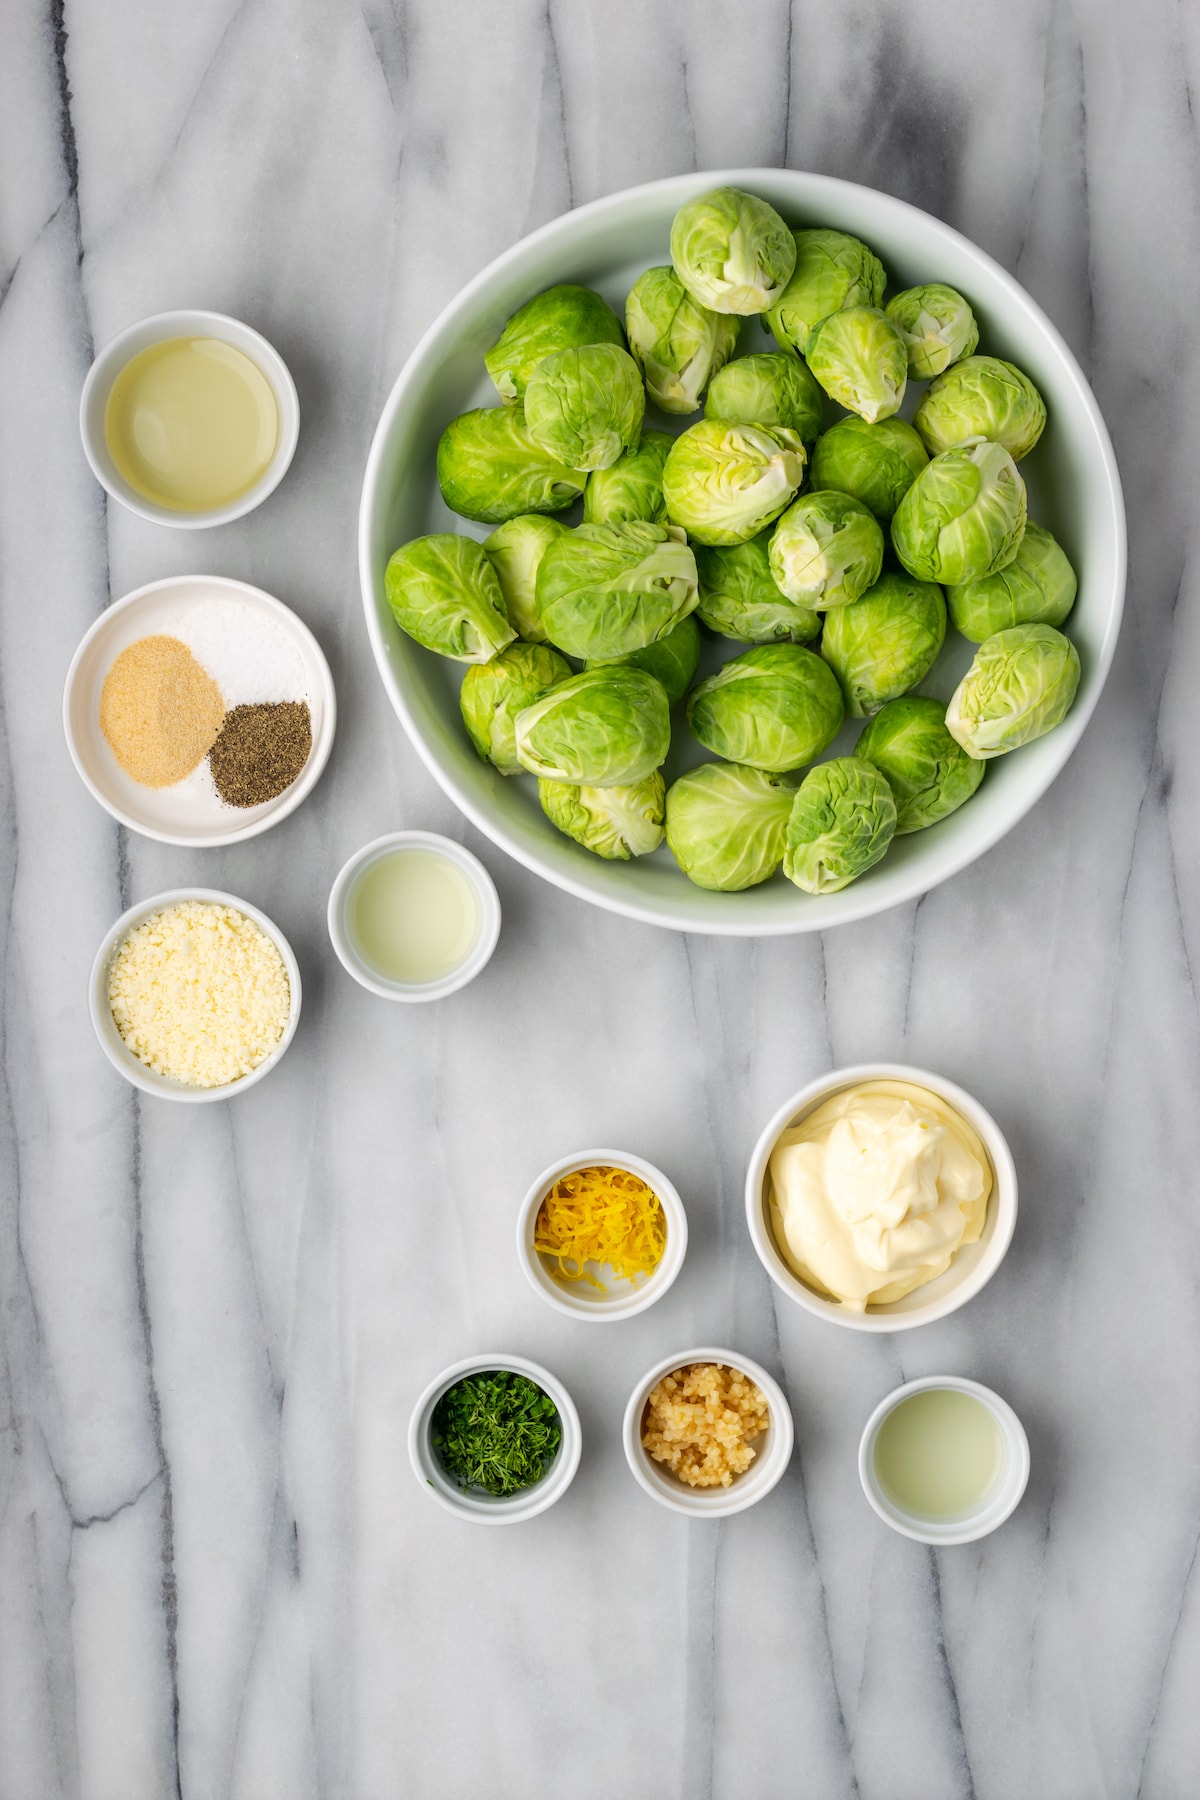 Overhead view of ingredients for smashed Brussels sprouts with lemon aioli